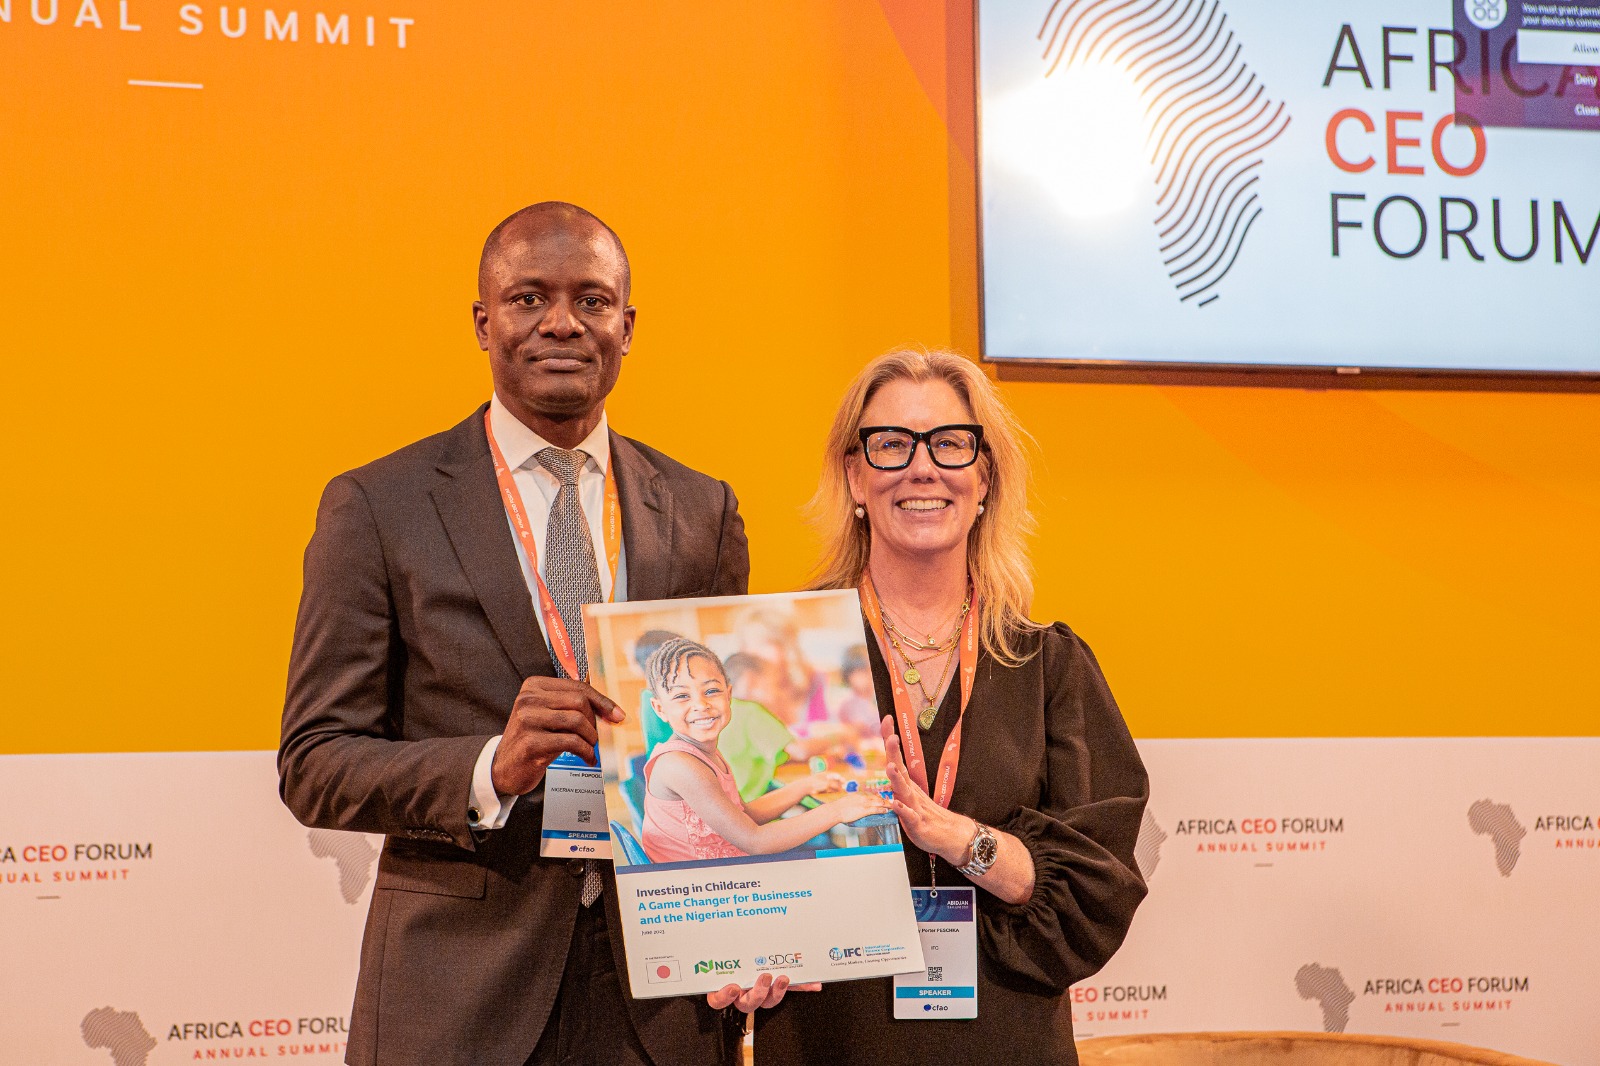 Photo: The launch Of Child Care Report – Africa CEO Forum In Abidjan Cote D’ Ivoire